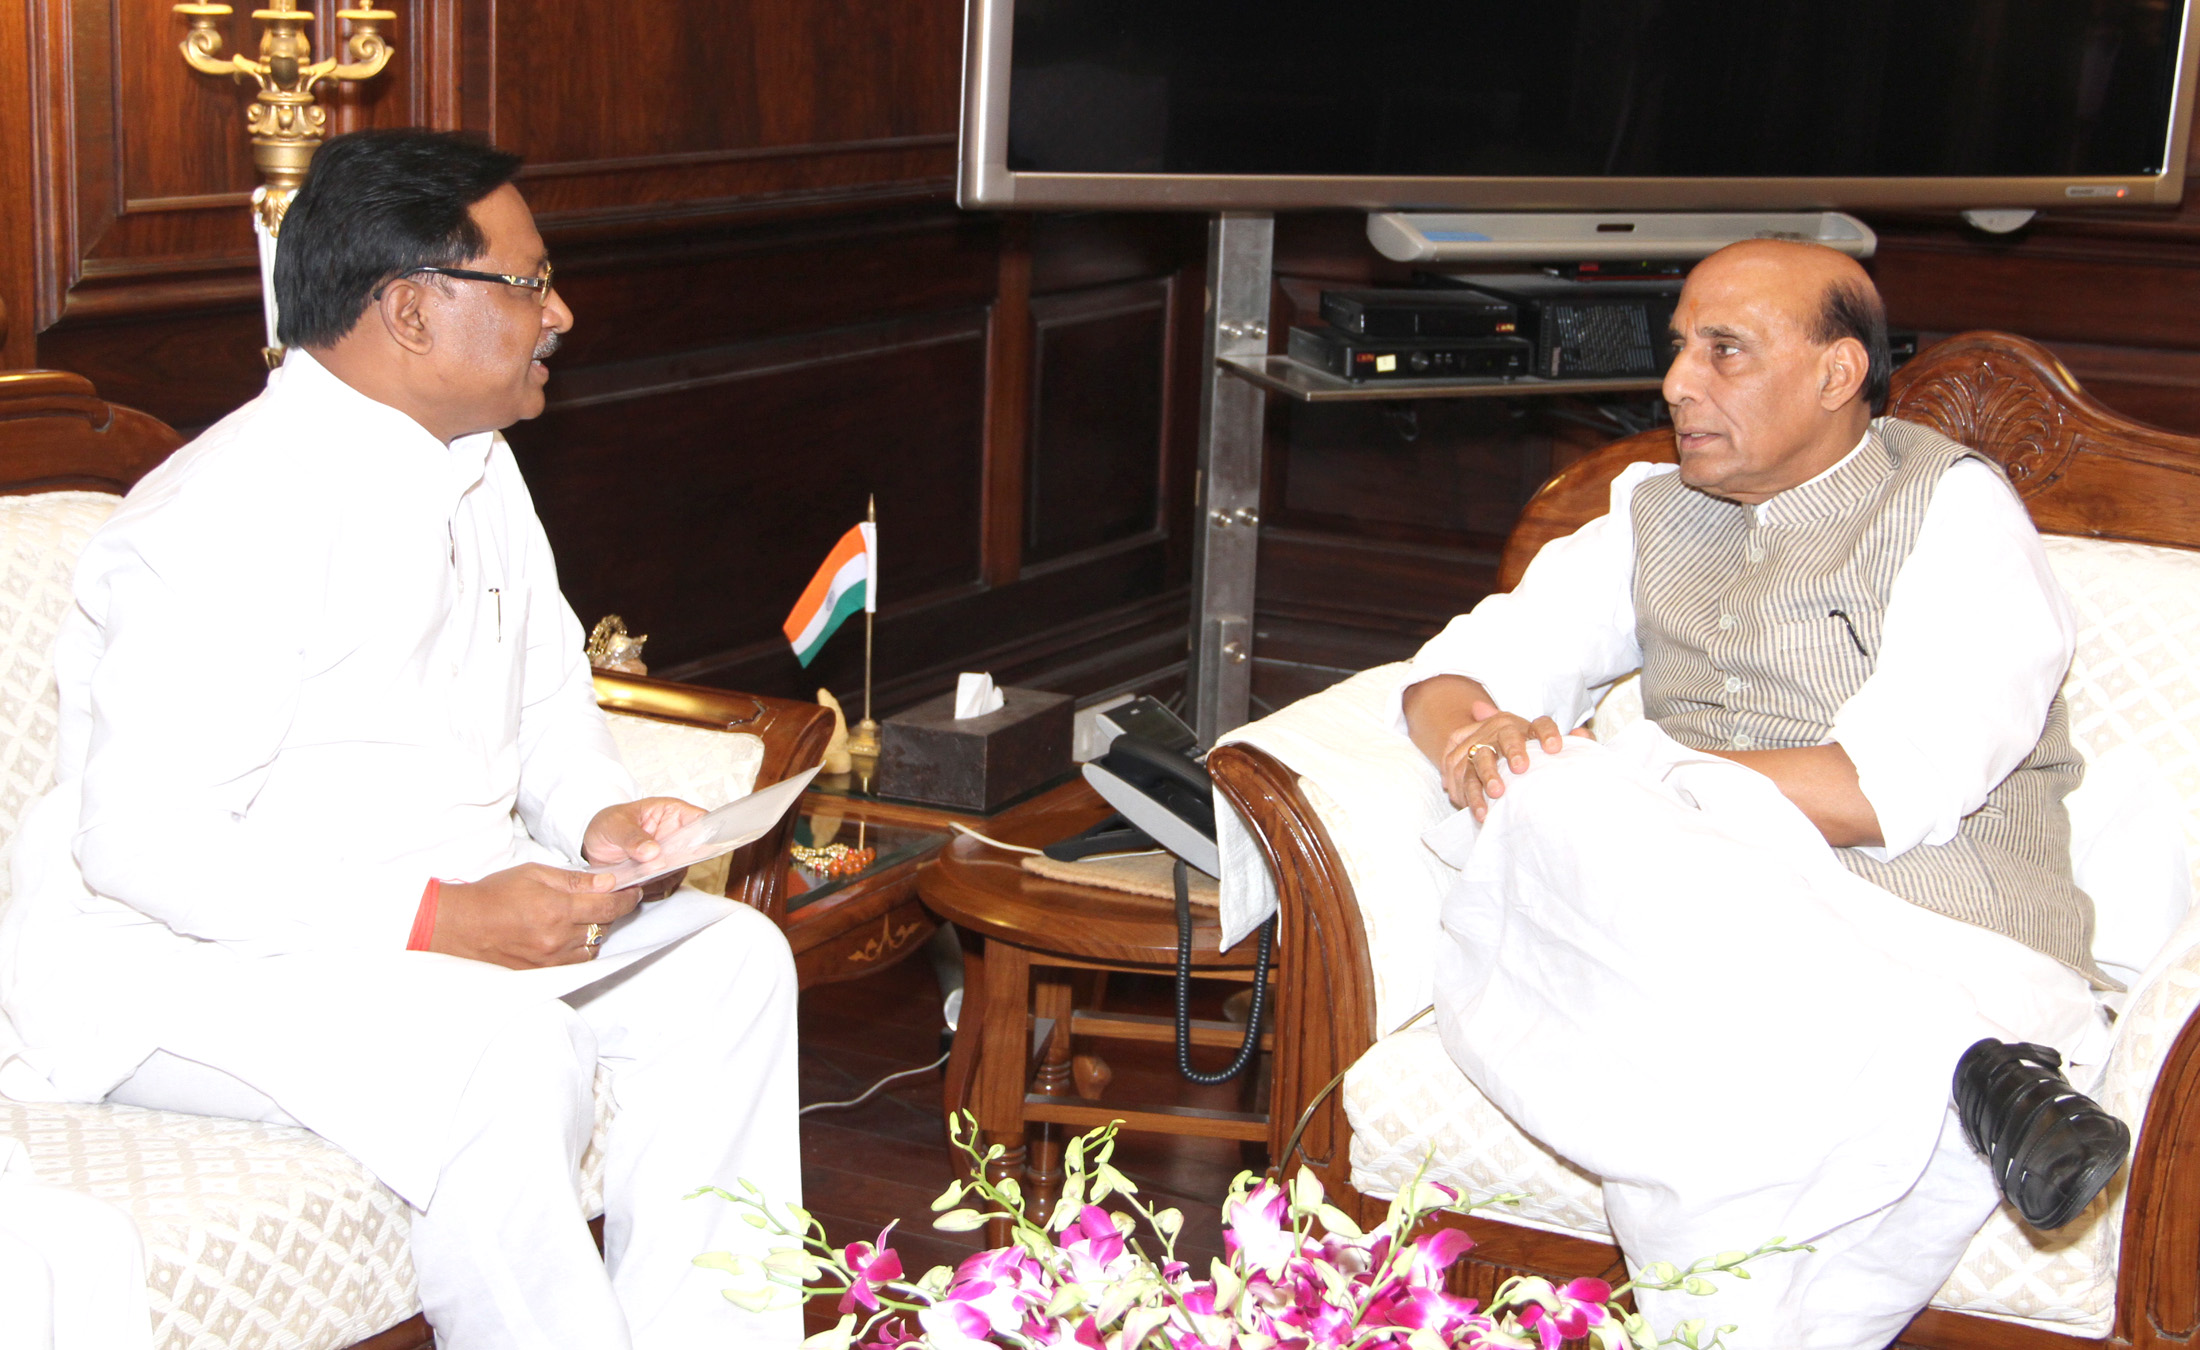 The Minister of State for Mines and Steel, Shri Vishnu Deo Sai calling on the Union Home Minister, Shri Rajnath Singh, in New Delhi on April 05, 2016.